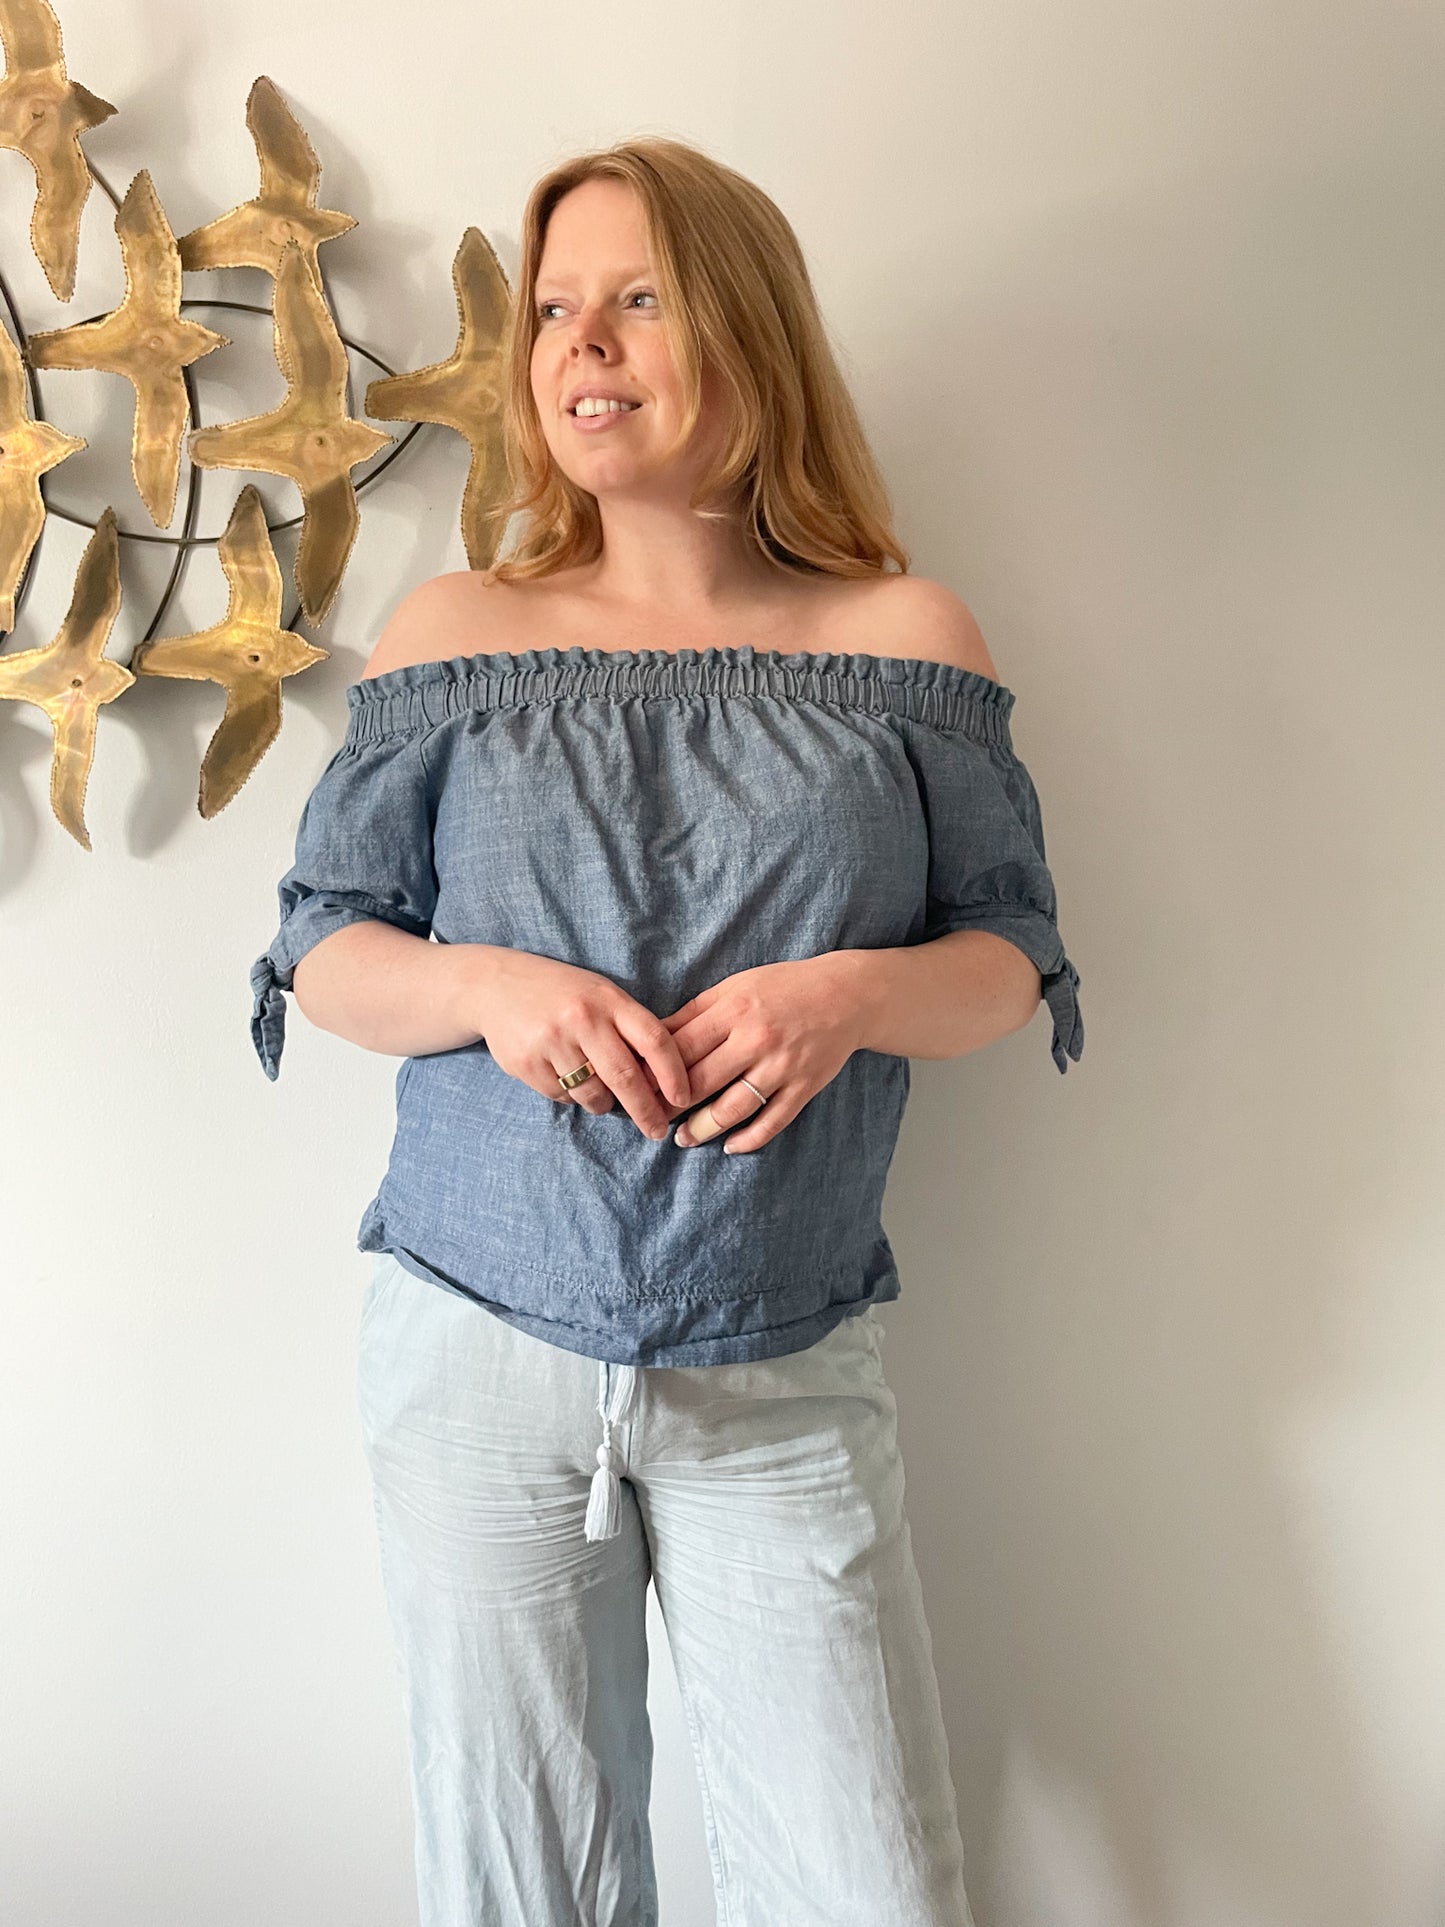 J. Crew Chambray Denim 100% Cotton Ruffle Off The Shoulder Top - S/M